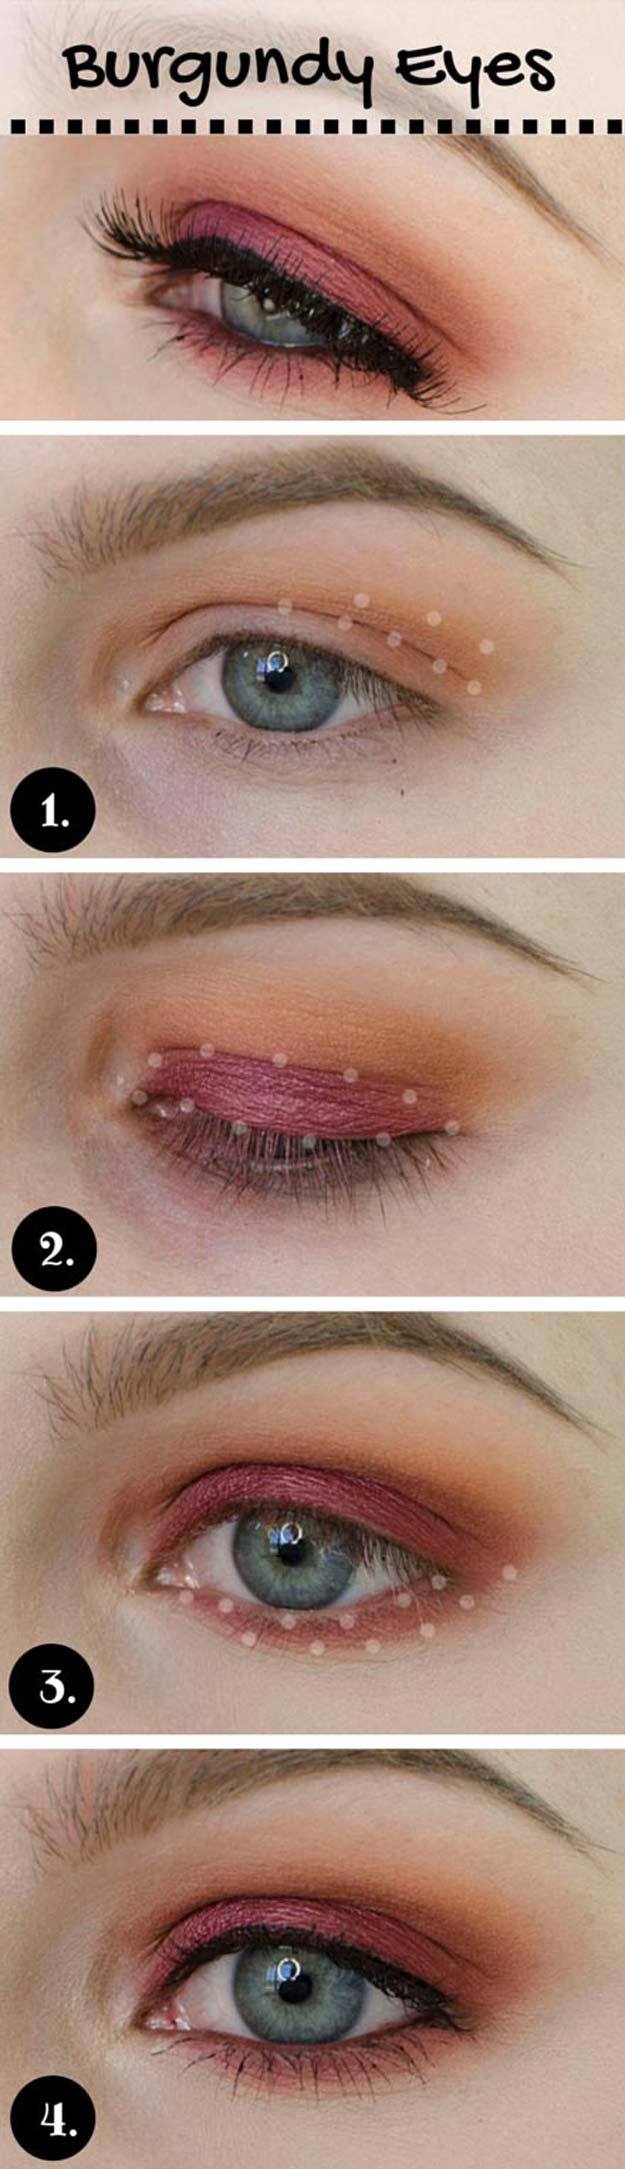 Best Eyeshadow Tutorials - Pretty Burgundy Make-up Look - Easy Step by Step How To For Eye Shadow - Cool Makeup Tricks and Eye Makeup Tutorial With Instructions - Quick Ways to Do Smoky Eye, Natural Makeup, Looks for Day and Evening, Brown and Blue Eyes - Cool Ideas for Beginners and Teens 